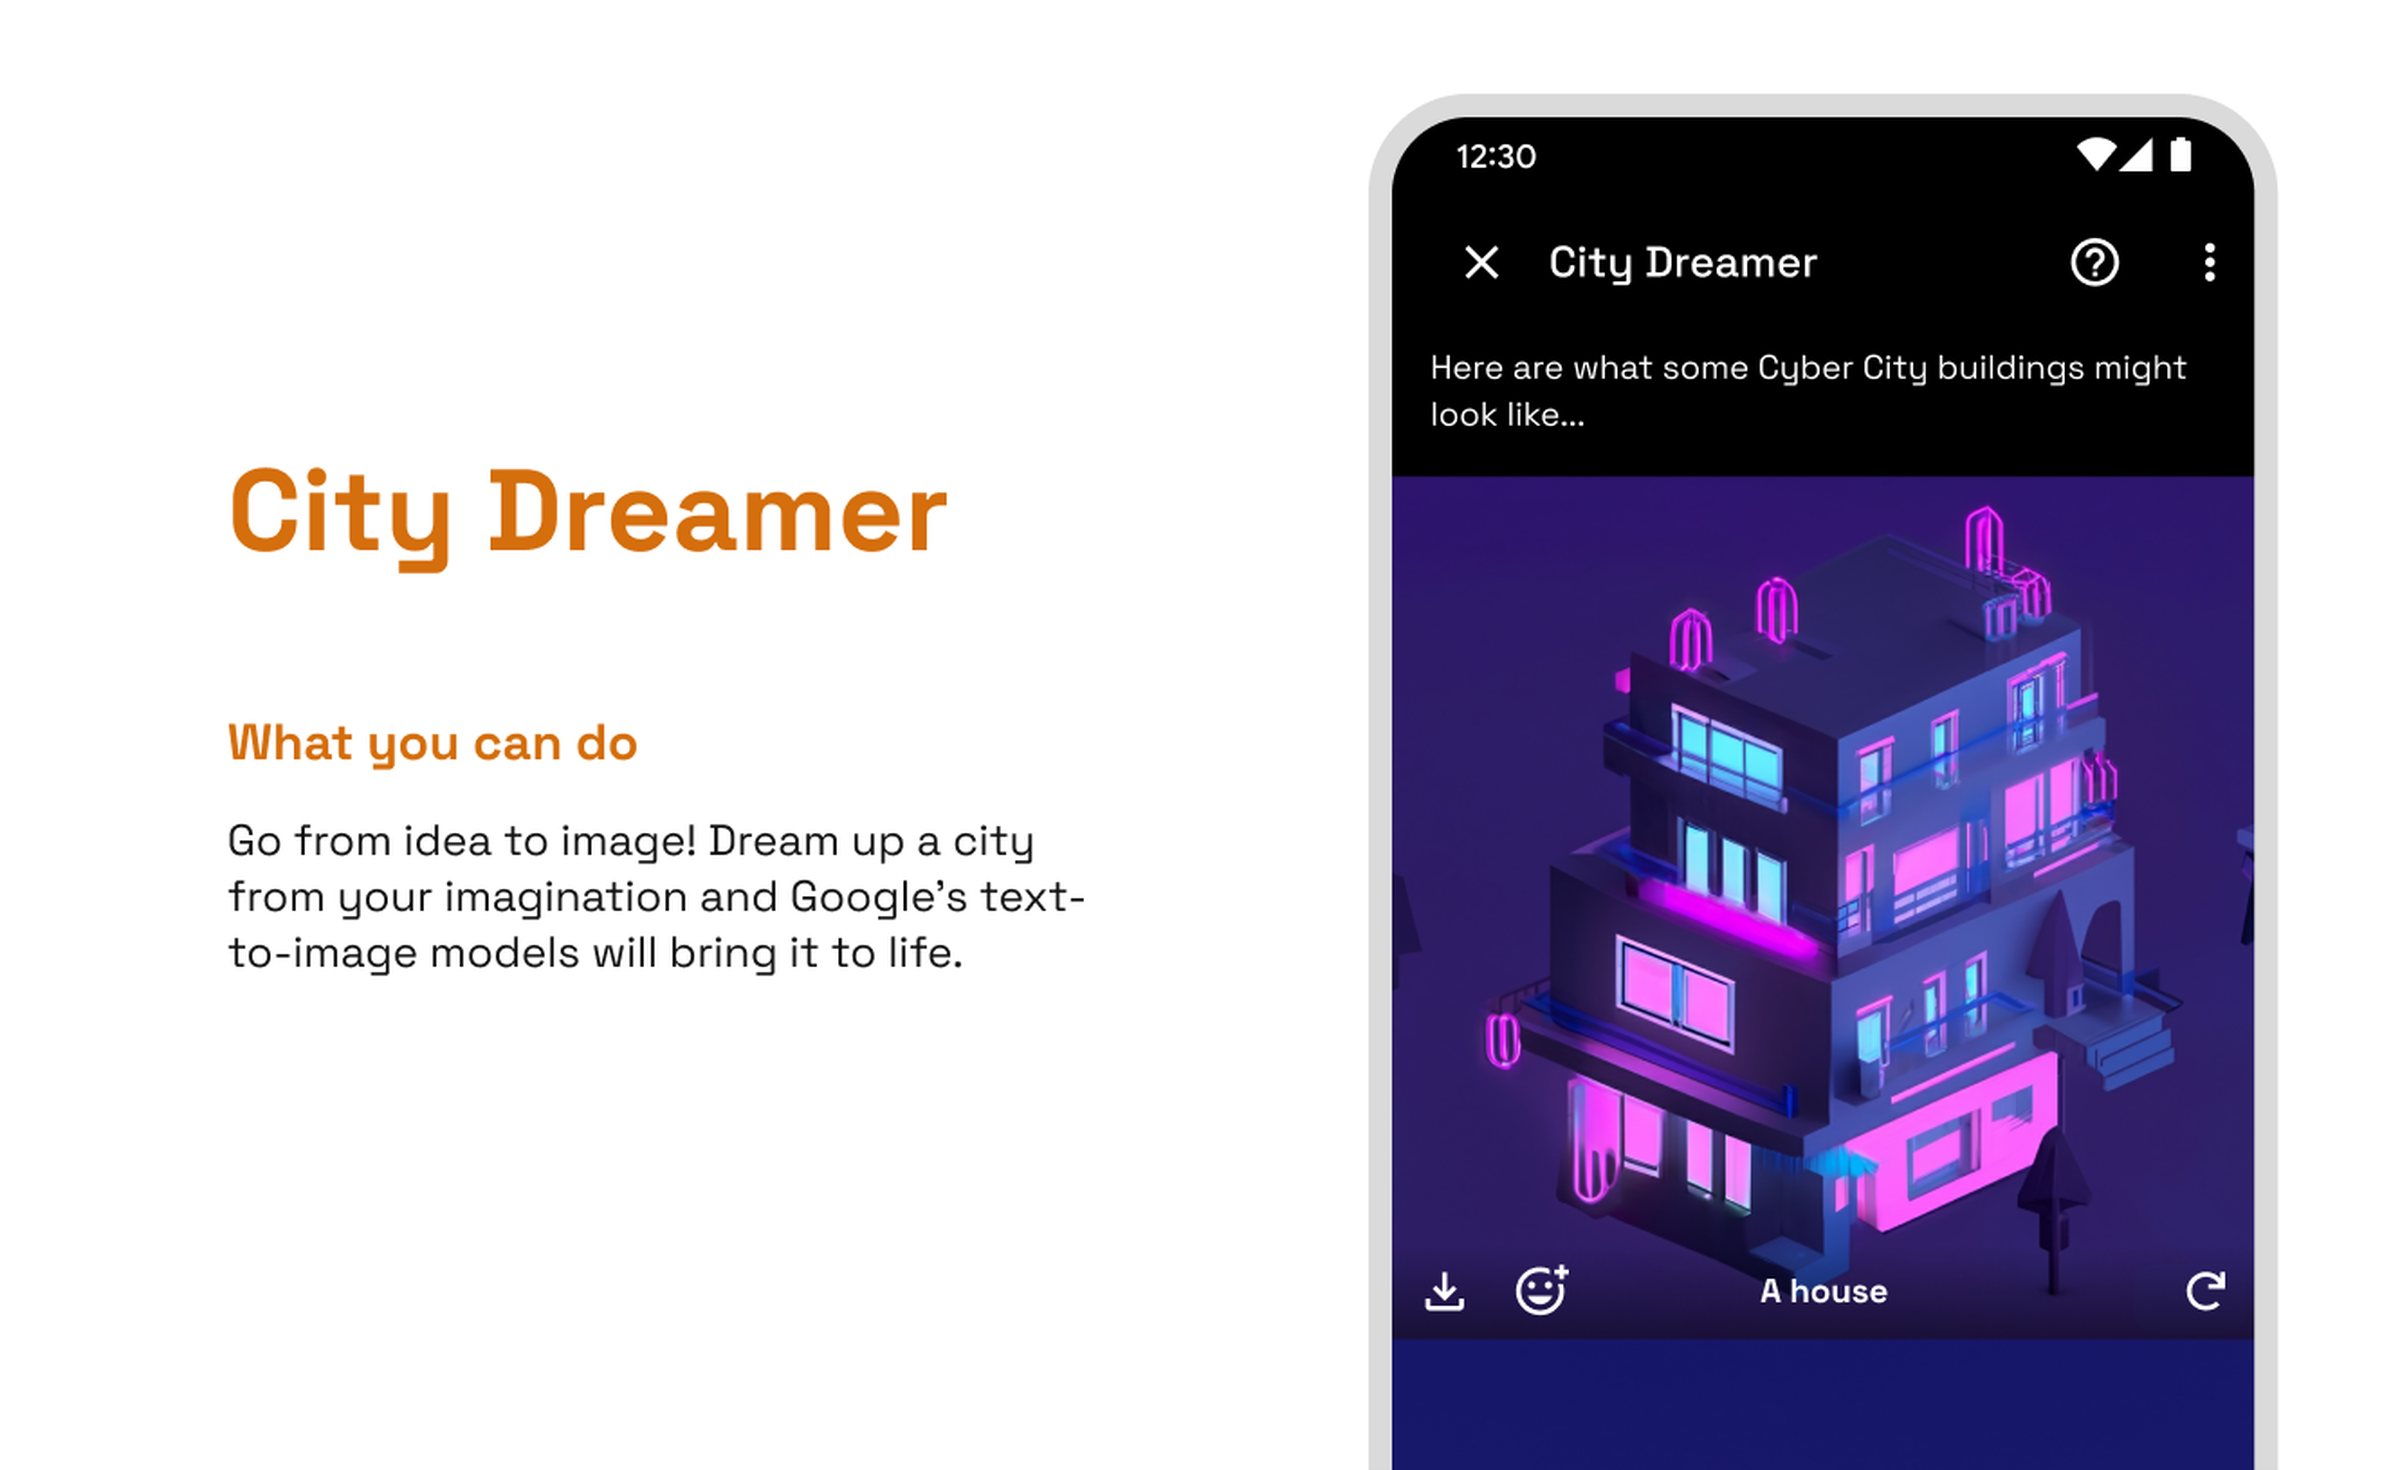 The “City Dreamer” task lets users request themed city buildings in isometric designs.